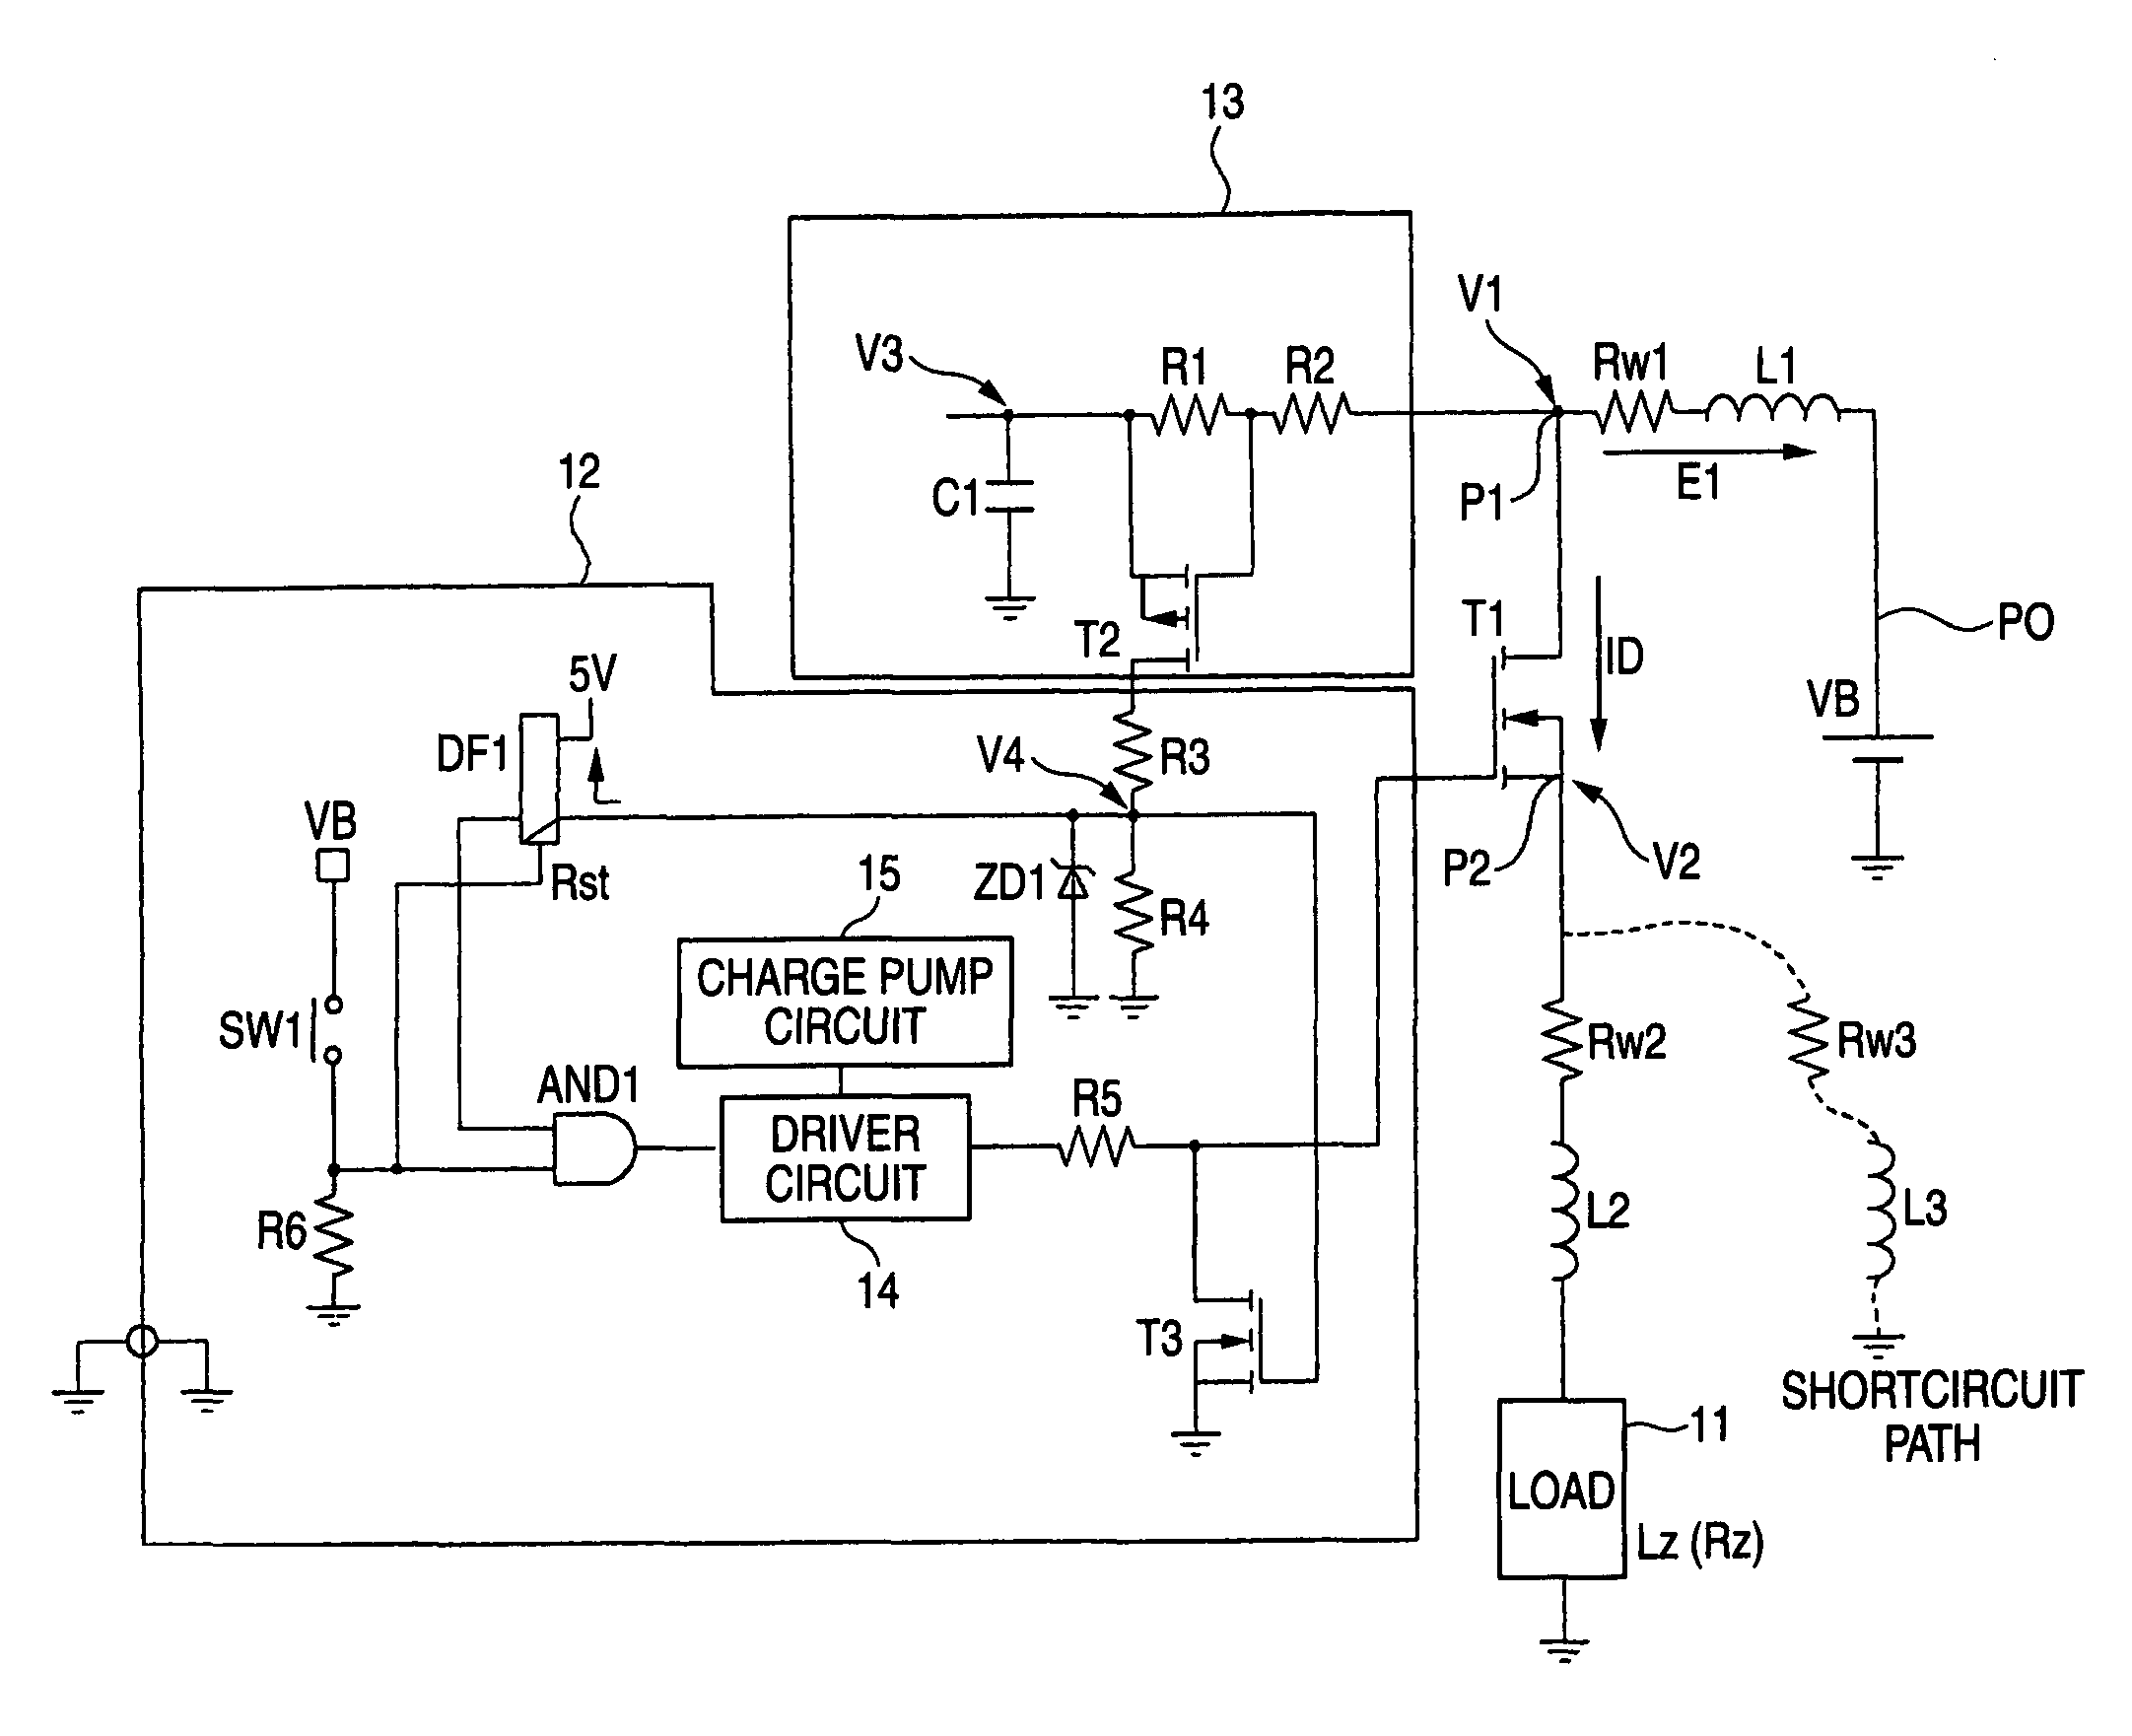 Control apparatus of semiconductor switch